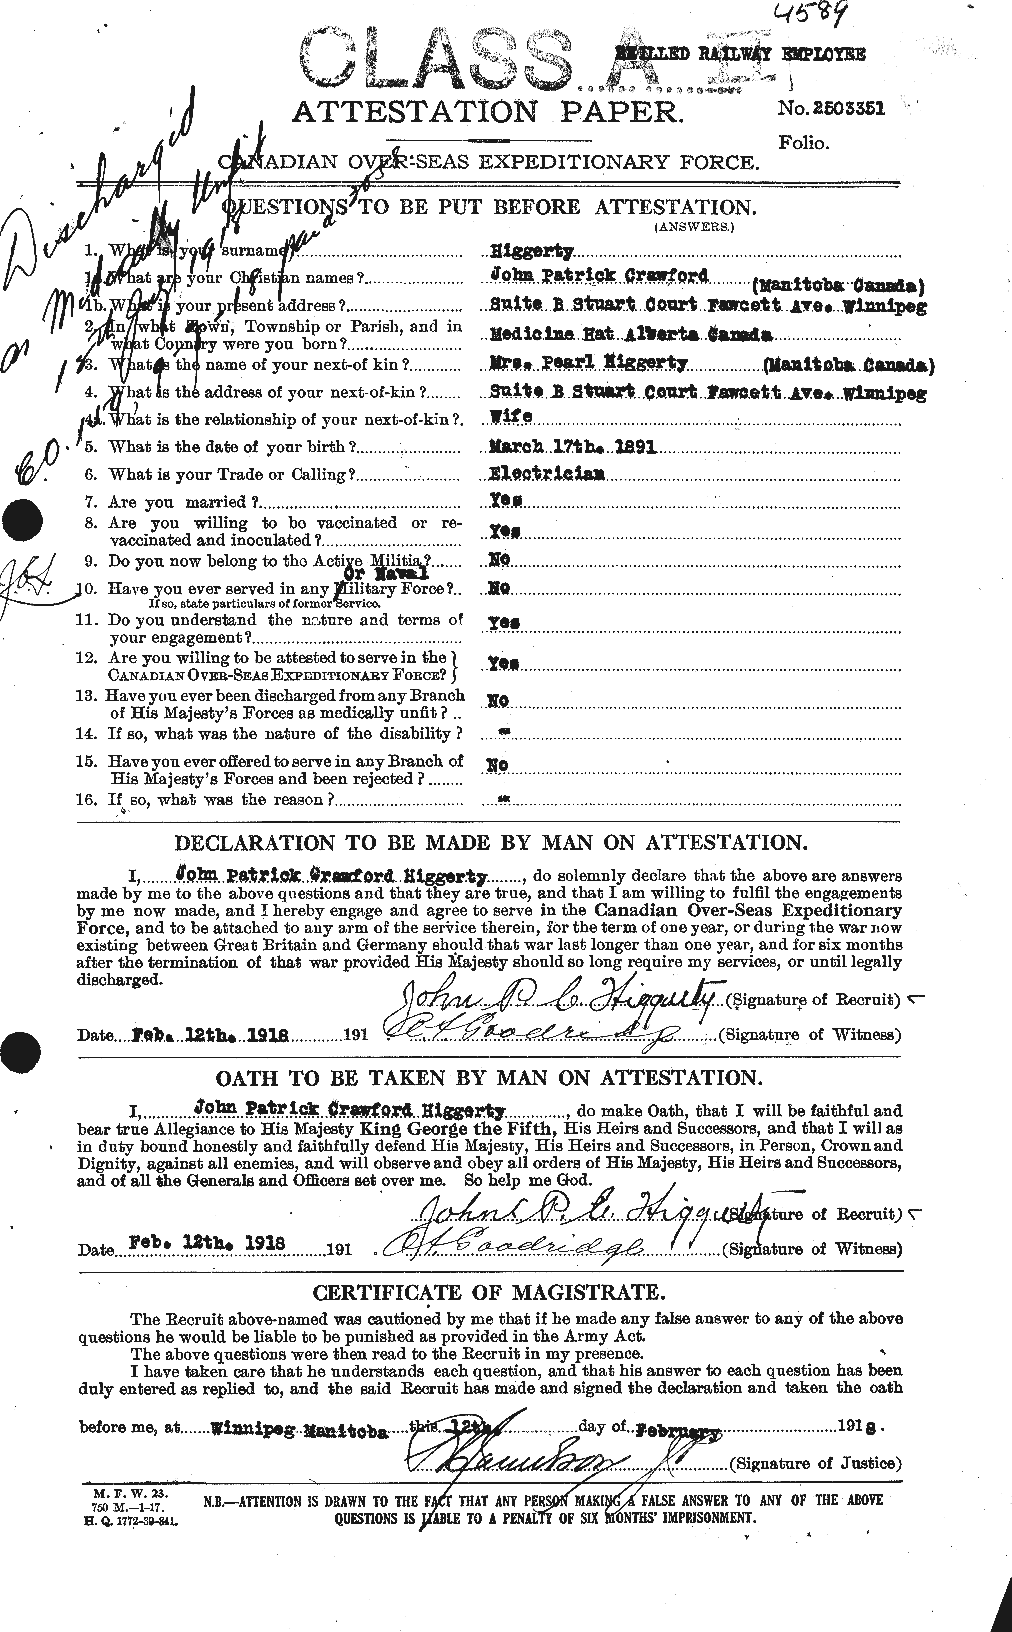 Personnel Records of the First World War - CEF 391781a